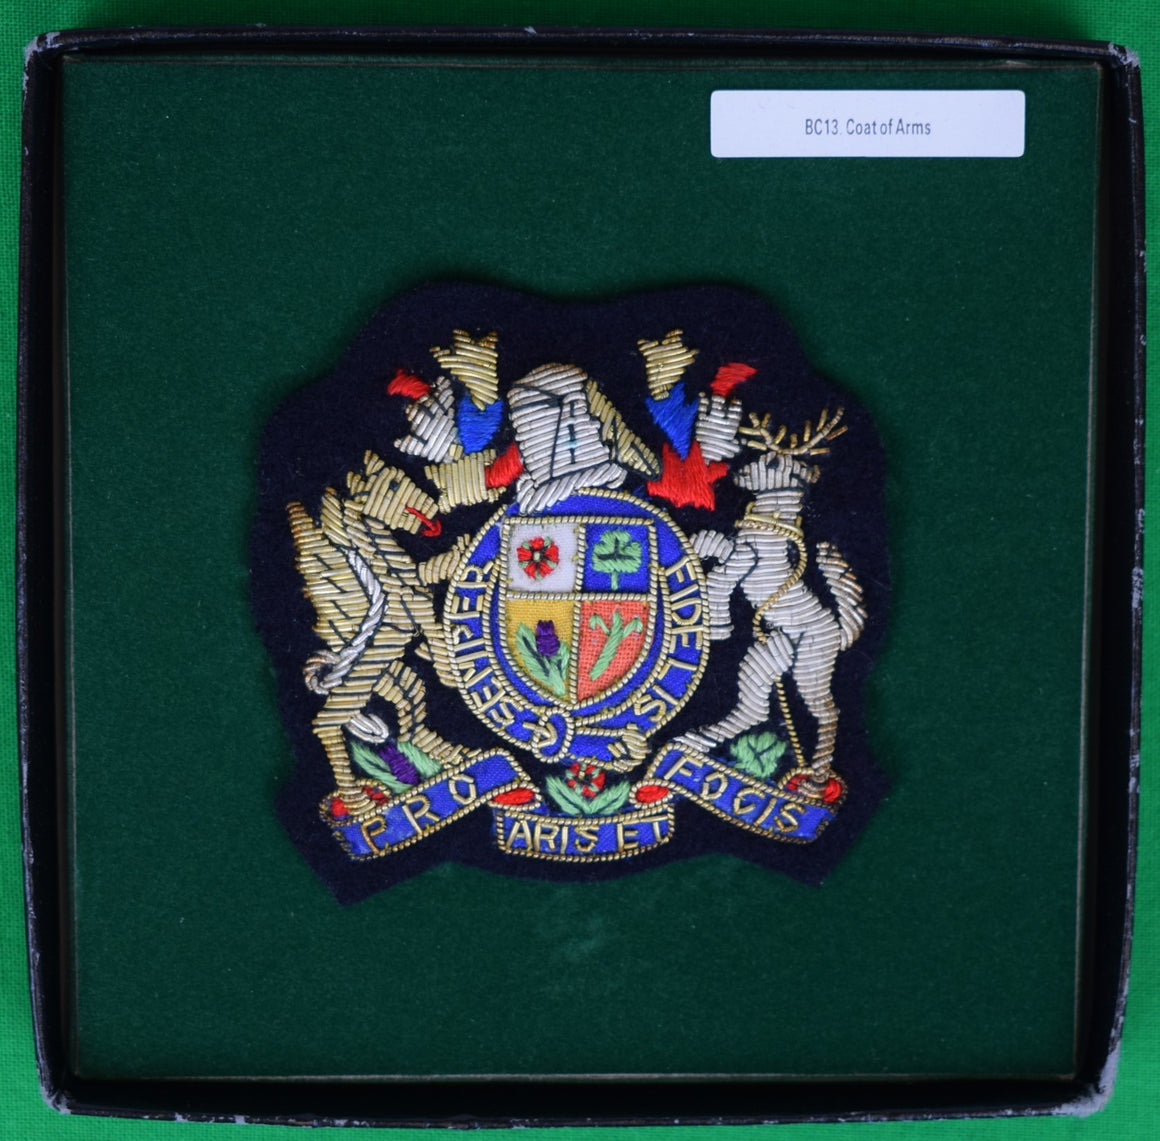 "Semper Fidelis Aris Et Pro Focis God And Country Coat Of Arms Blazer Badge" (New in Box)